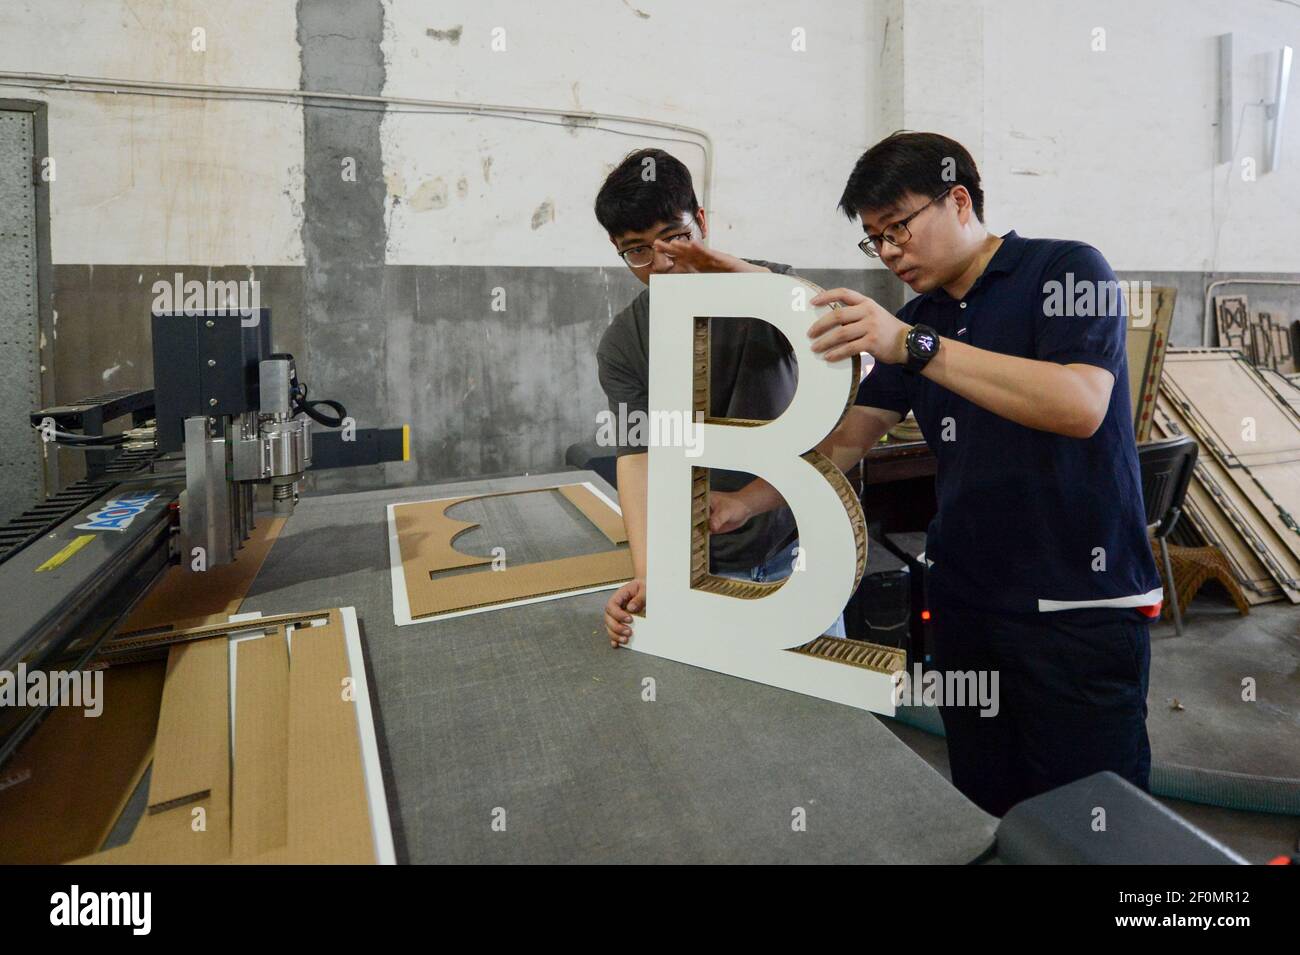 In this undated photo, Chinese man Zheng Majun, right, and his team assemble an alphabet made of discarded cardboard boxes at the workshop in Haiyan county, Jiaxing city, east China's Zhejiang province. Chinese man Zheng Majun started his business in packaging after graduated in Haiyan county, Jiaxing city, east China's Zhejiang province. He found that many parents were required to help their kids create artworks made of discarded cardboard boxes. After doing market research and development for more than a year, Zheng started a business in toys made of paper. His design team first created thre Stock Photo